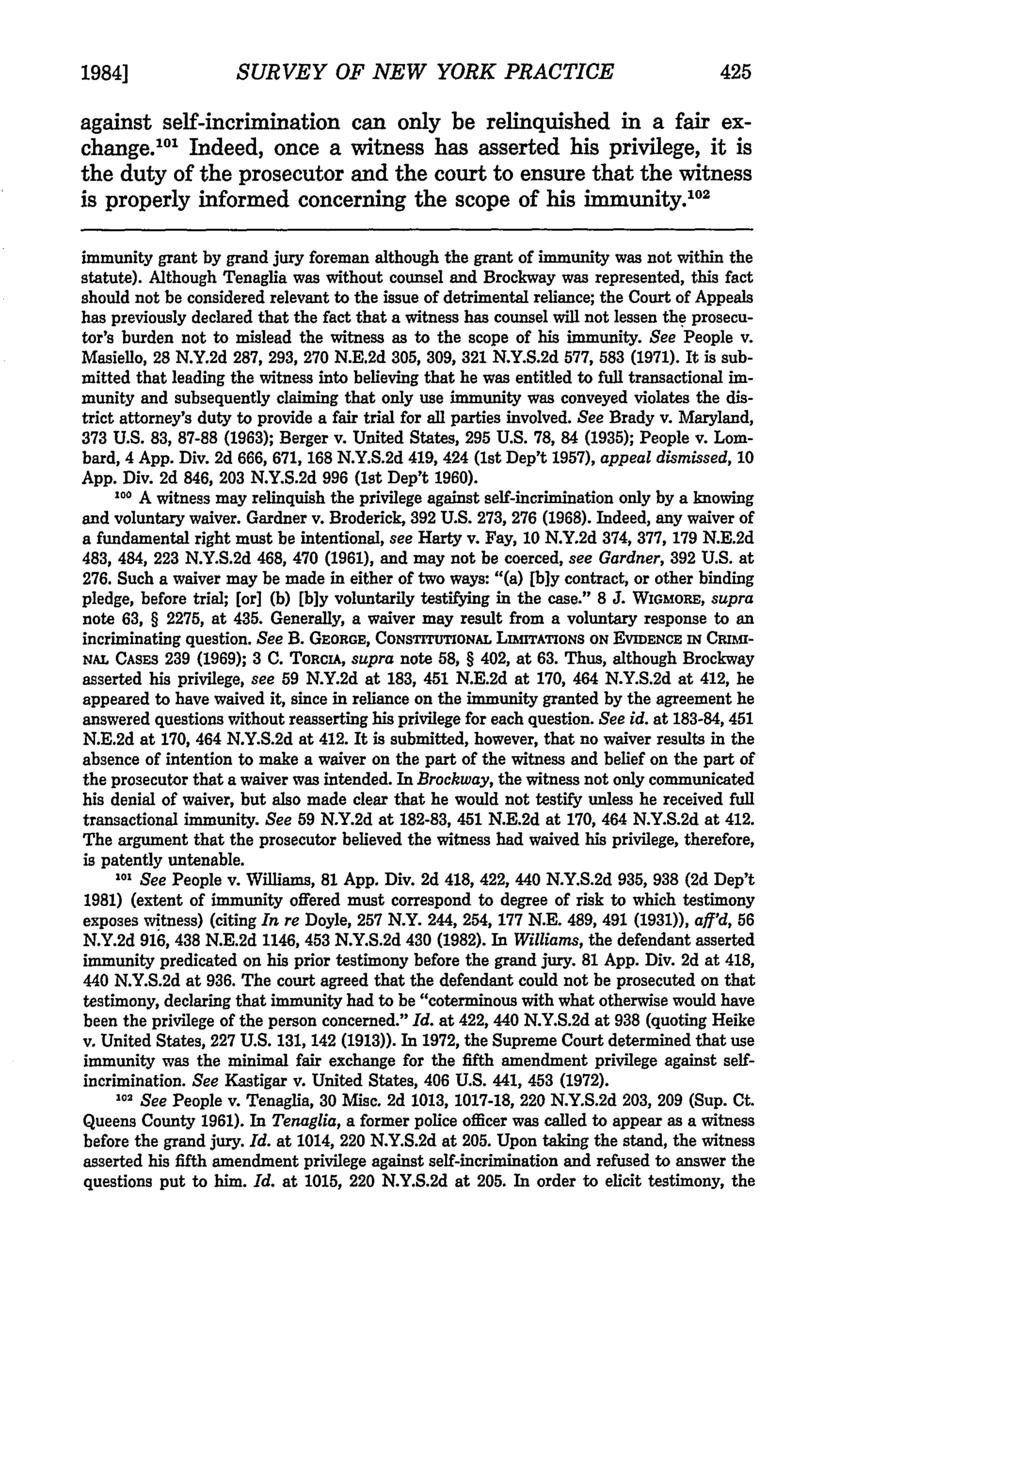 1984] SURVEY OF NEW YORK PRACTICE against self-incrimination can only be relinquished in a fair exchange.